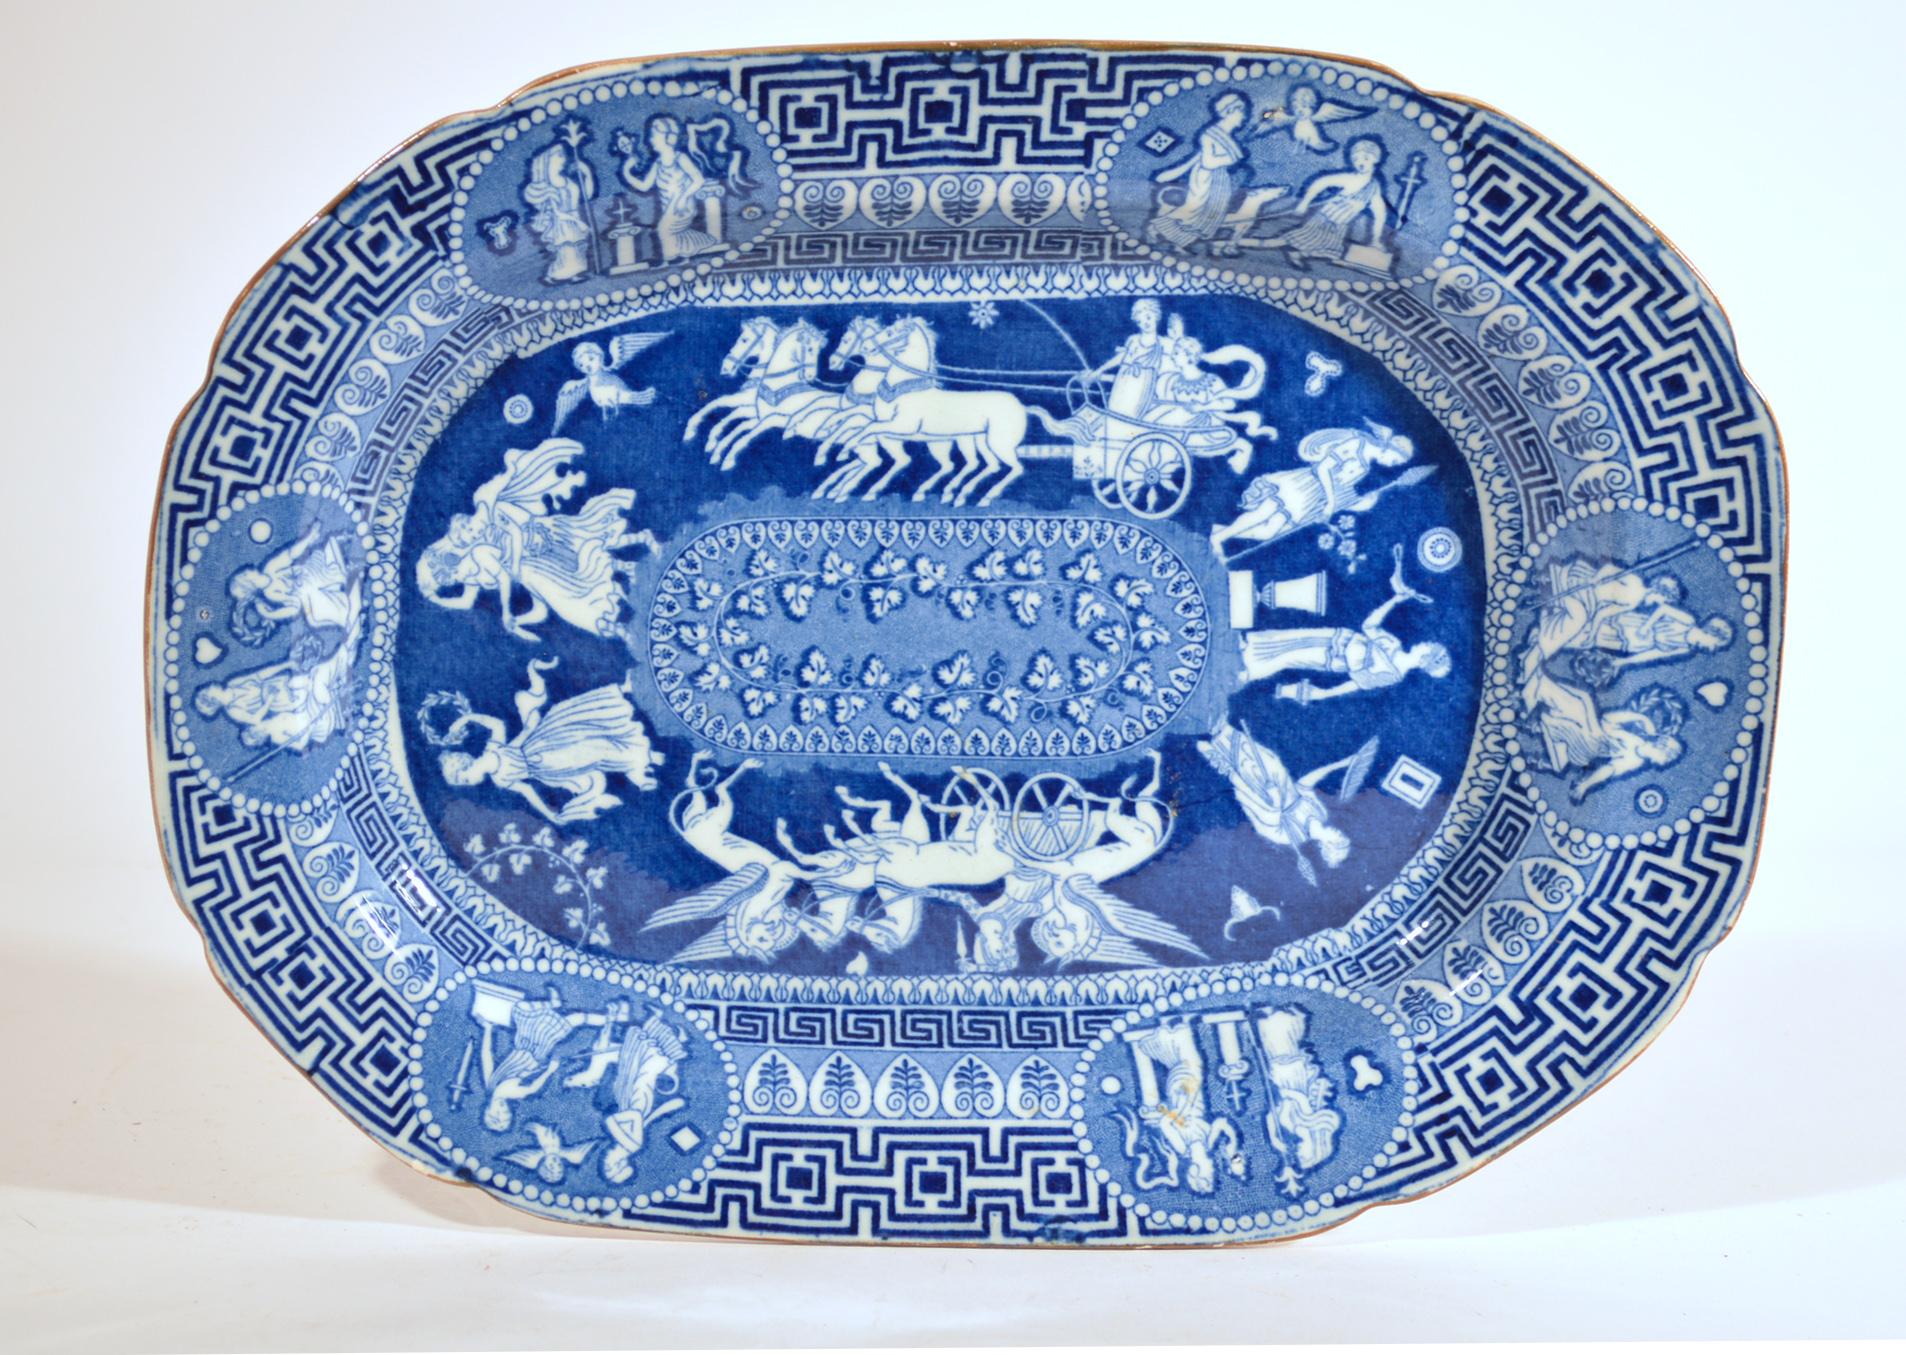 Herculaneum Neo-classical Greek pattern blue printed dish,
Early-19th century.

The Herculaneum pottery underglaze blue central pattern shows aseries of images encicling an oval panel with a leafy vine. There are two main images, one with winged